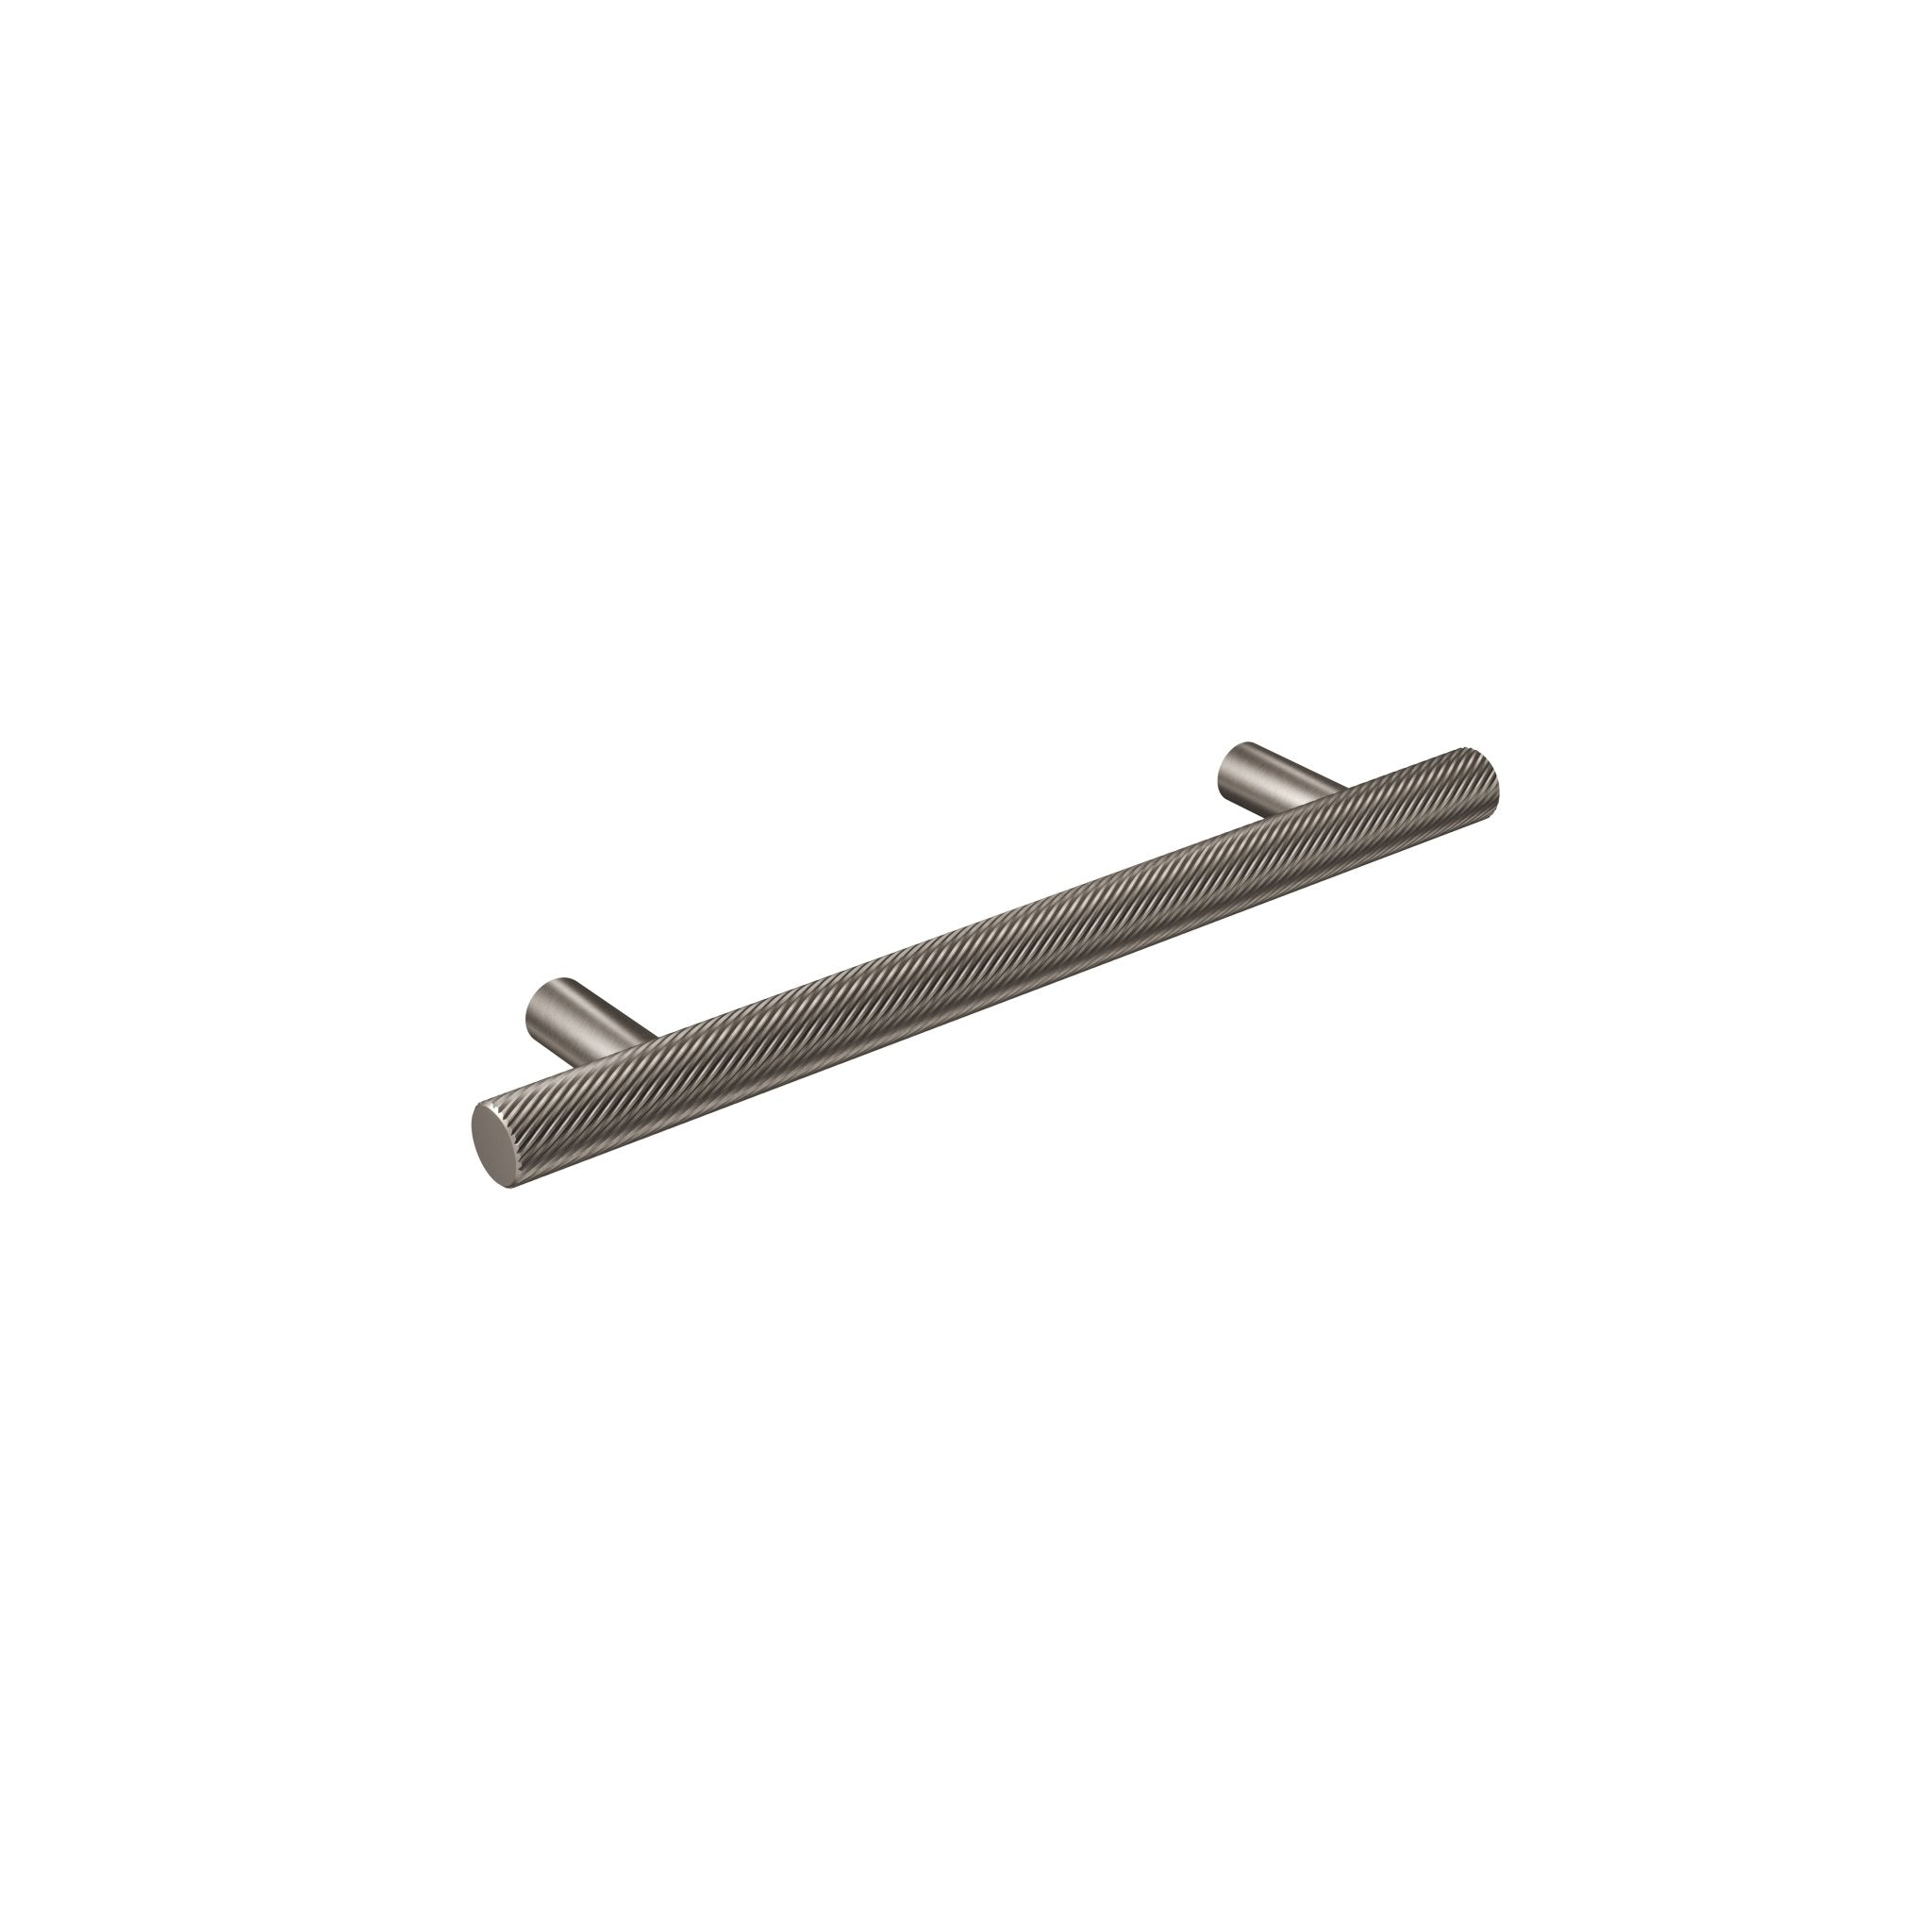 Spiral 12mm Pull Handle-Industrial Nickel-180mm-The Hairpin Leg Co.